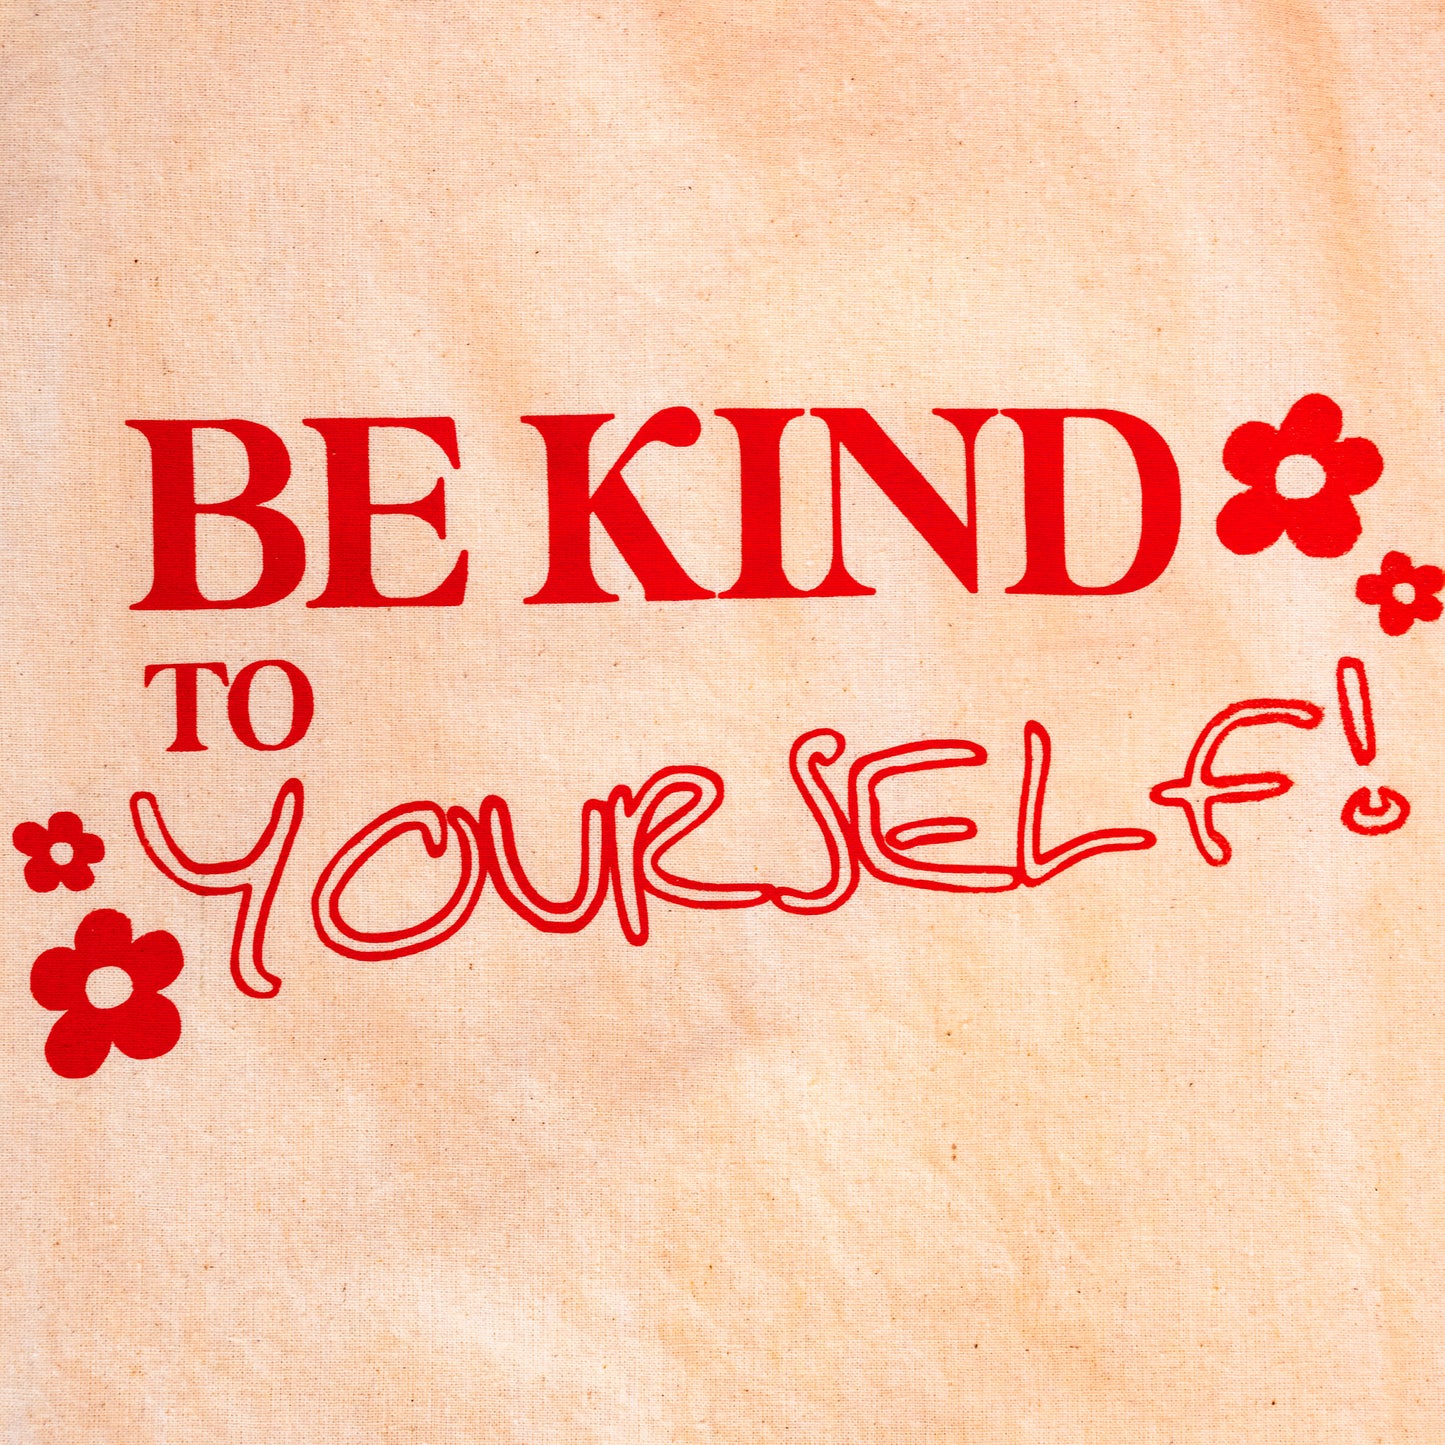 Be Kind To Yourself Tote Bag